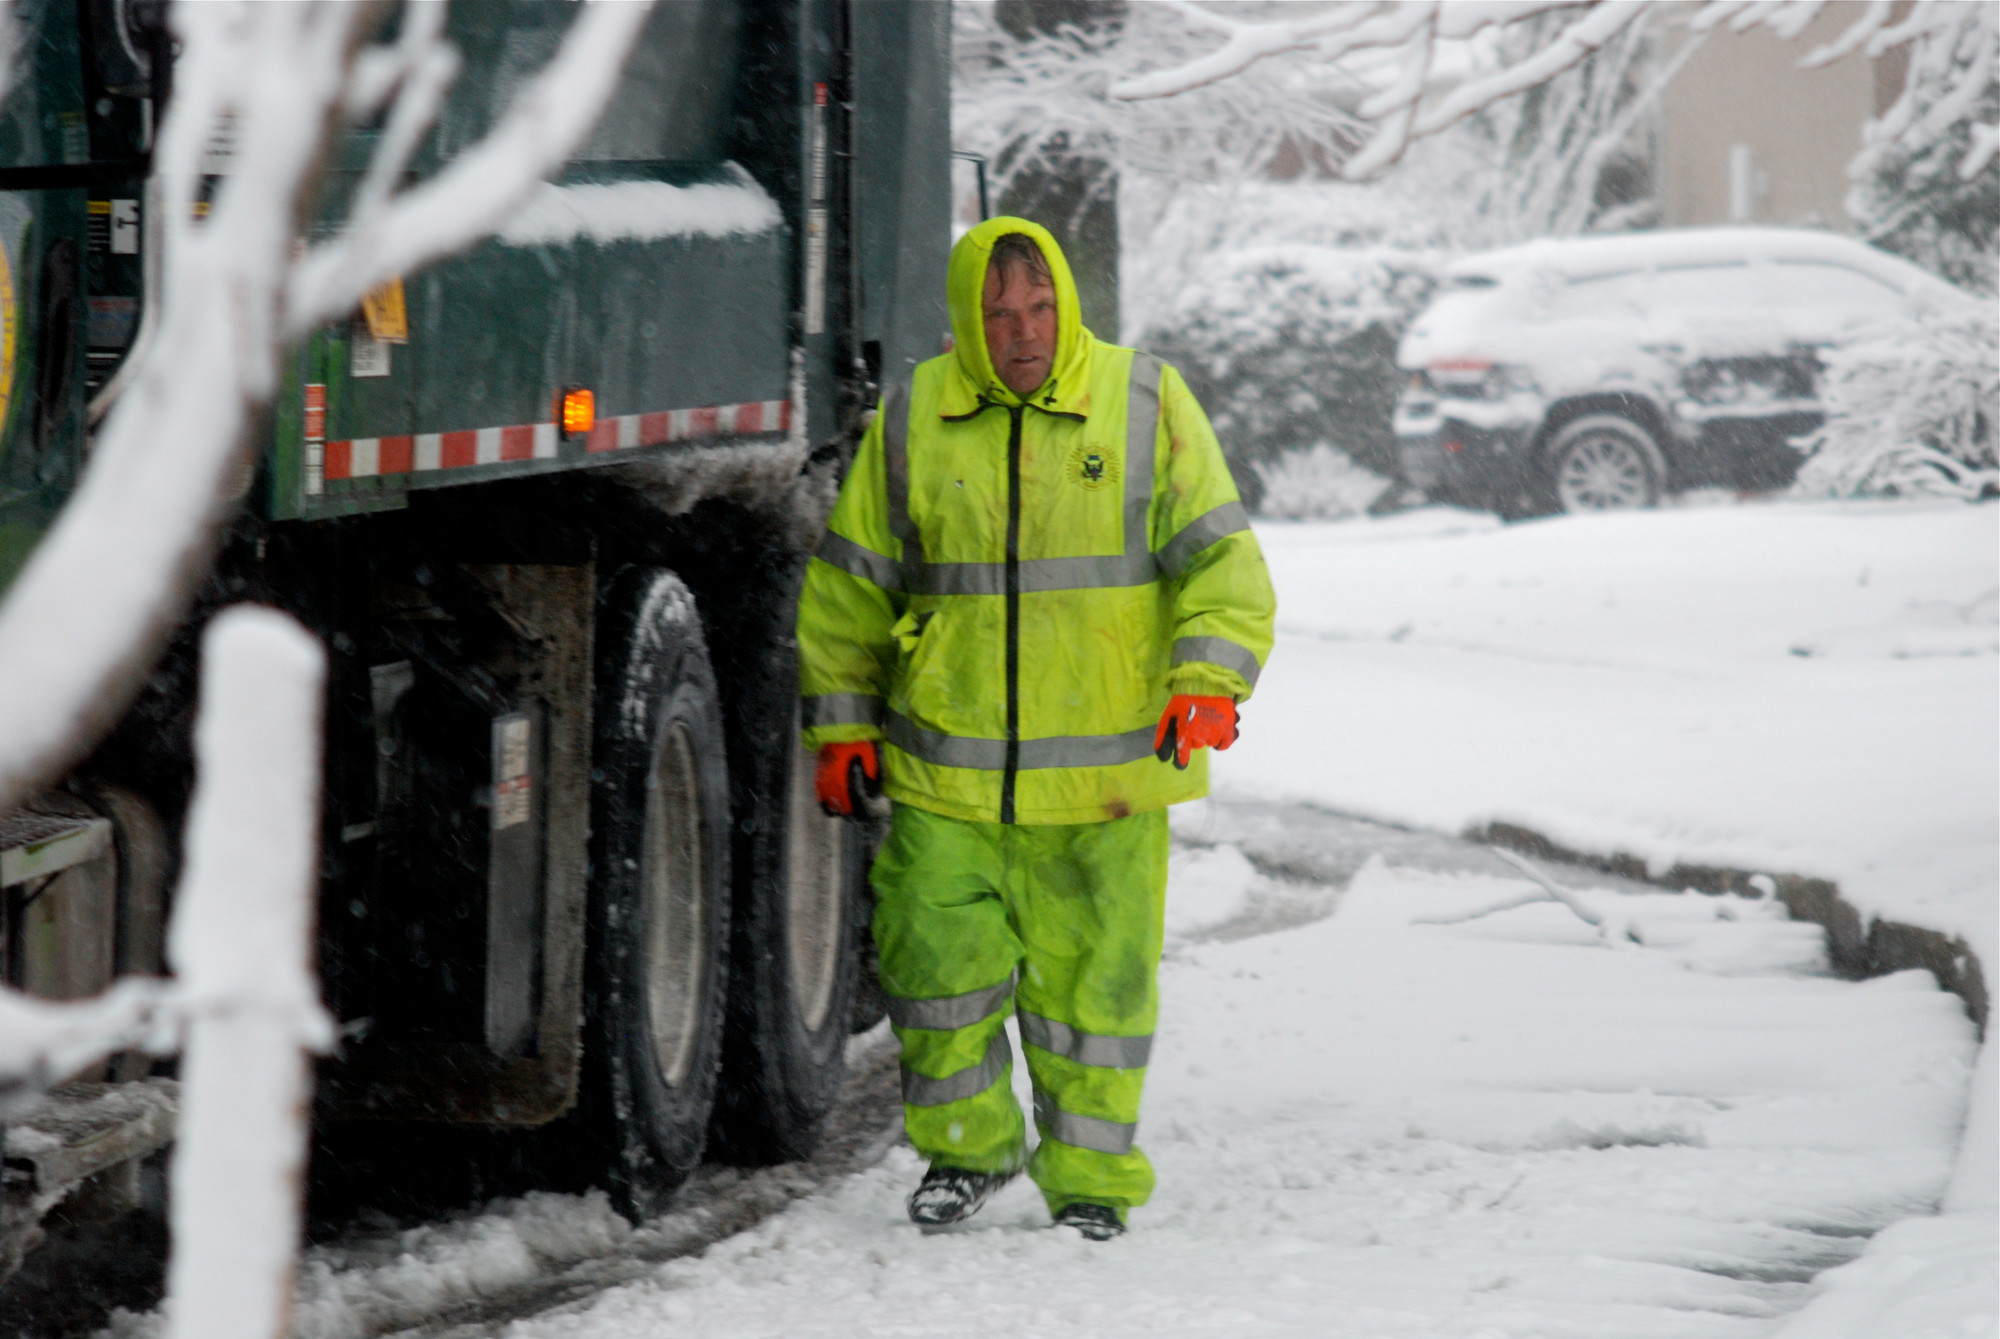 Billy Miller, a Town of Hempstead sanitation worker, collected trash amid the snowstorm on Friday morning.